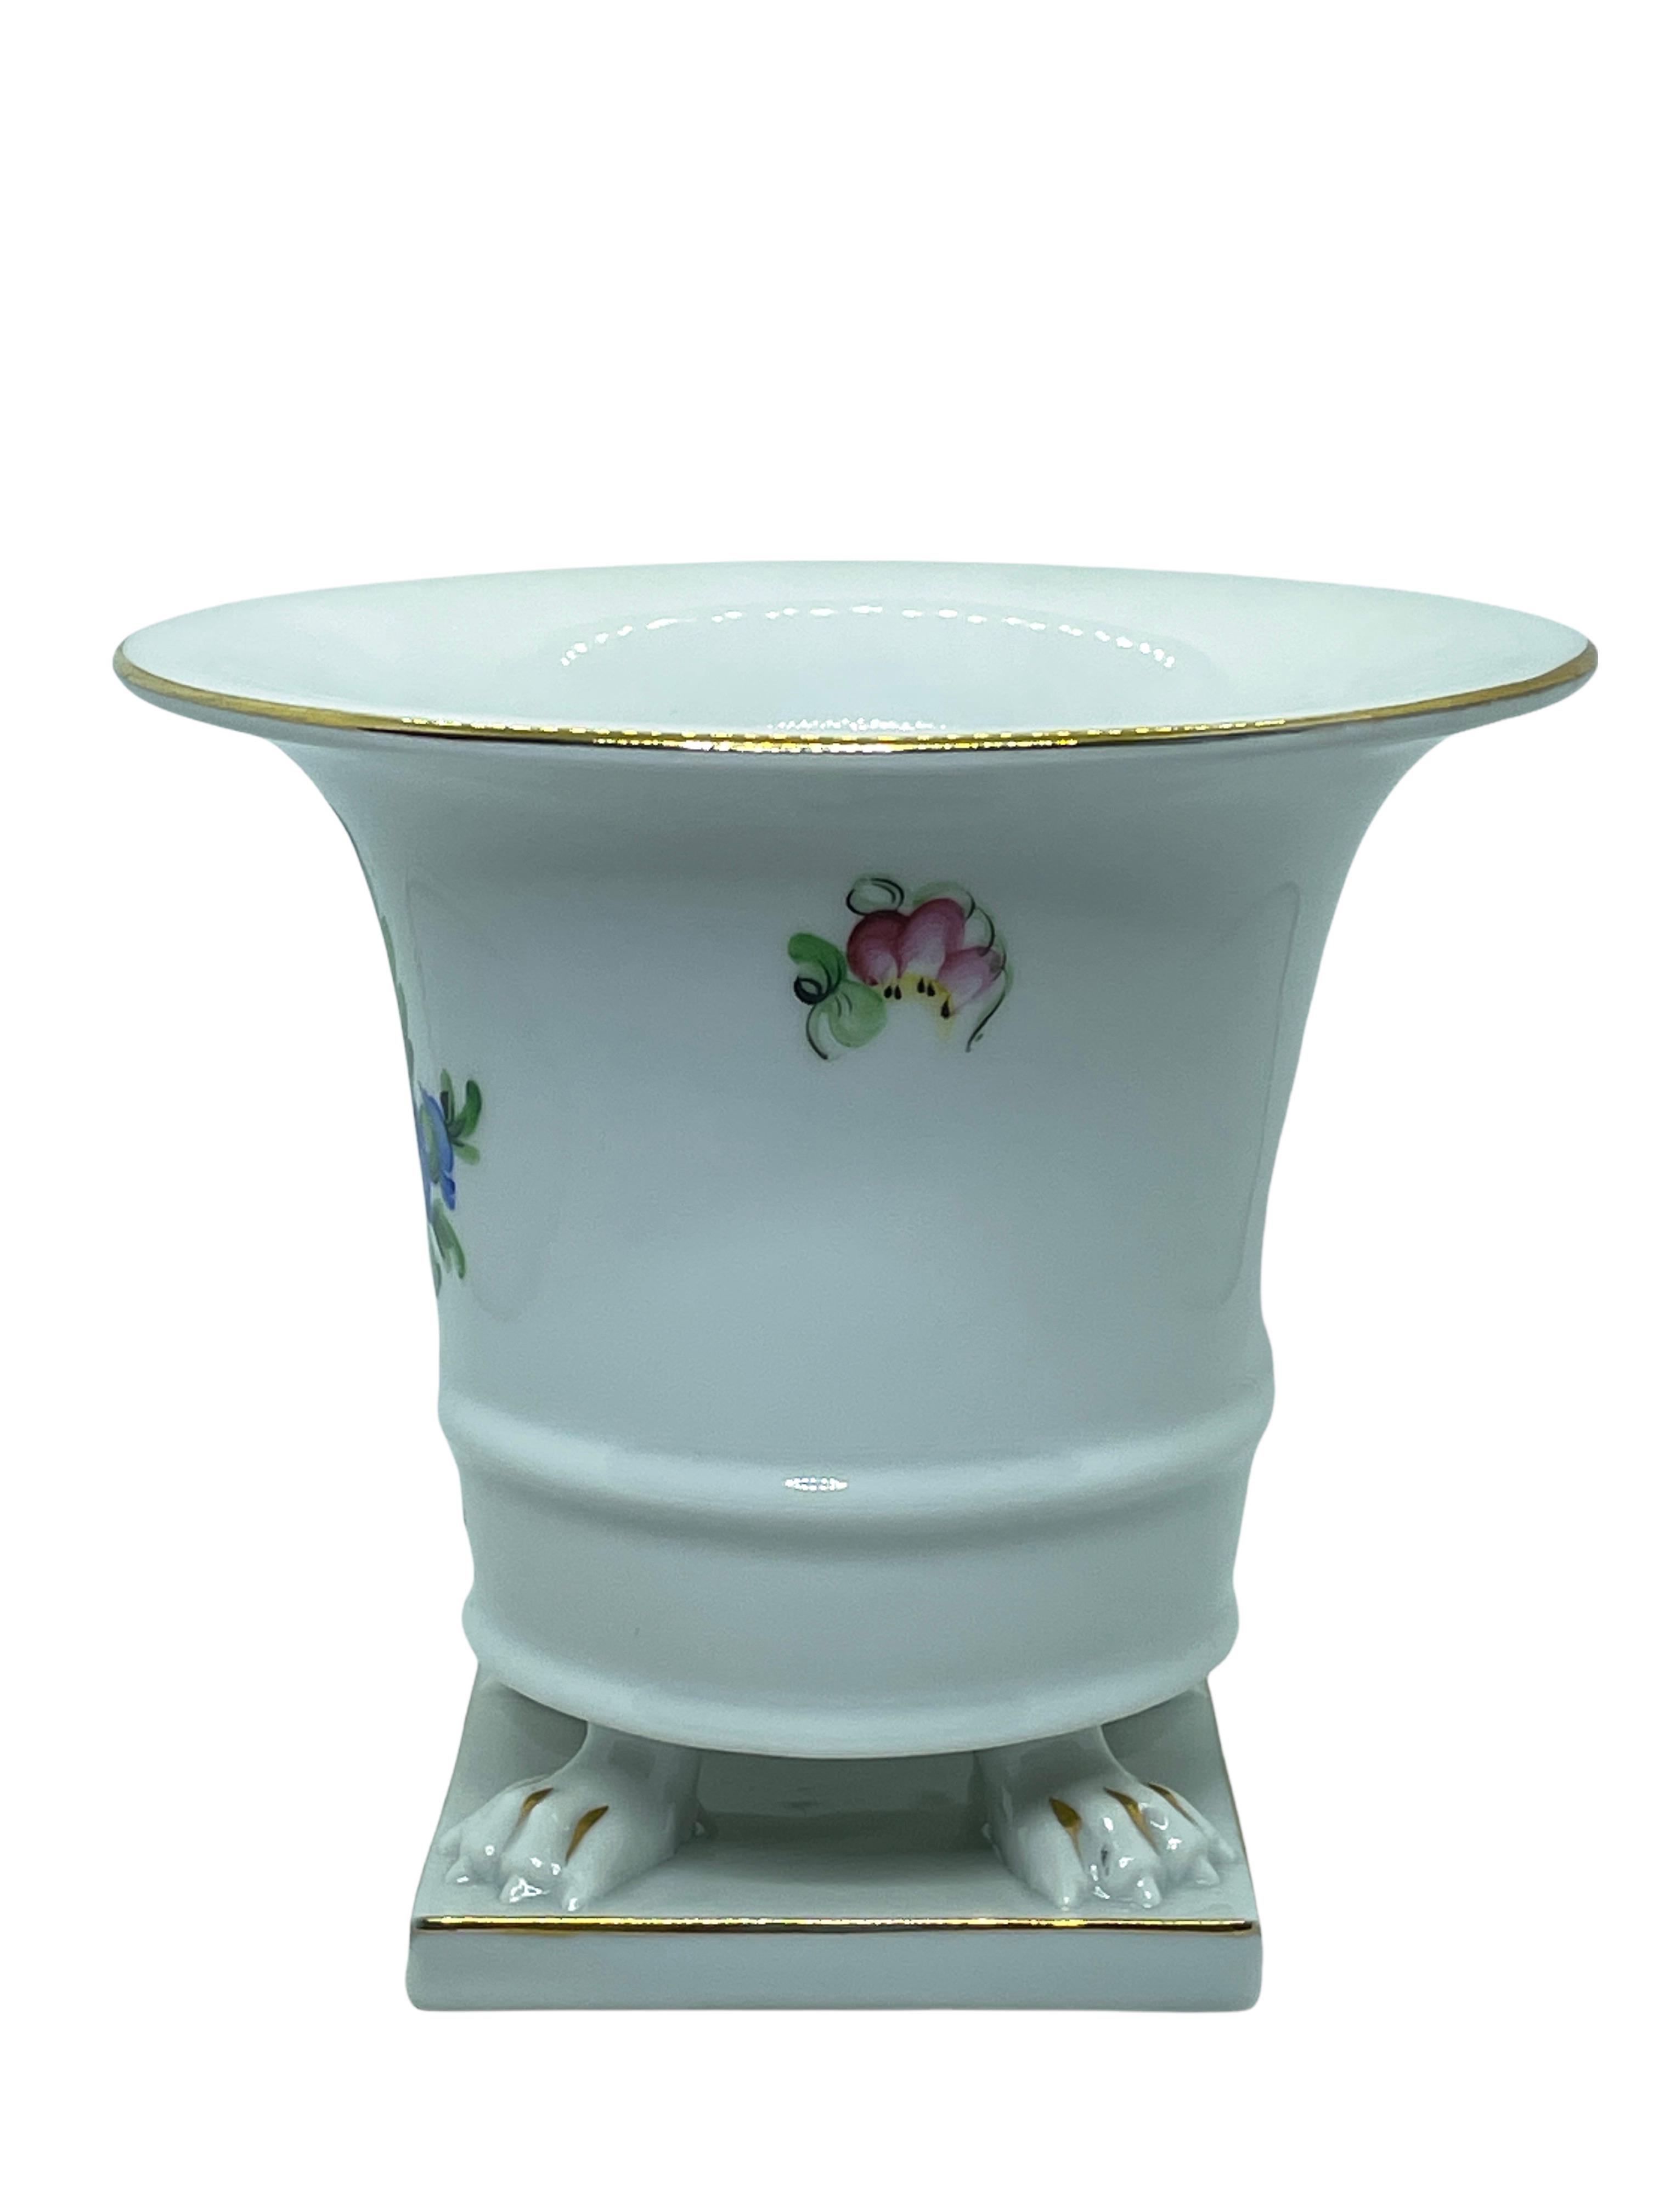 Exquisite vase in hand painted Hungarian porcelain by Herend. In 